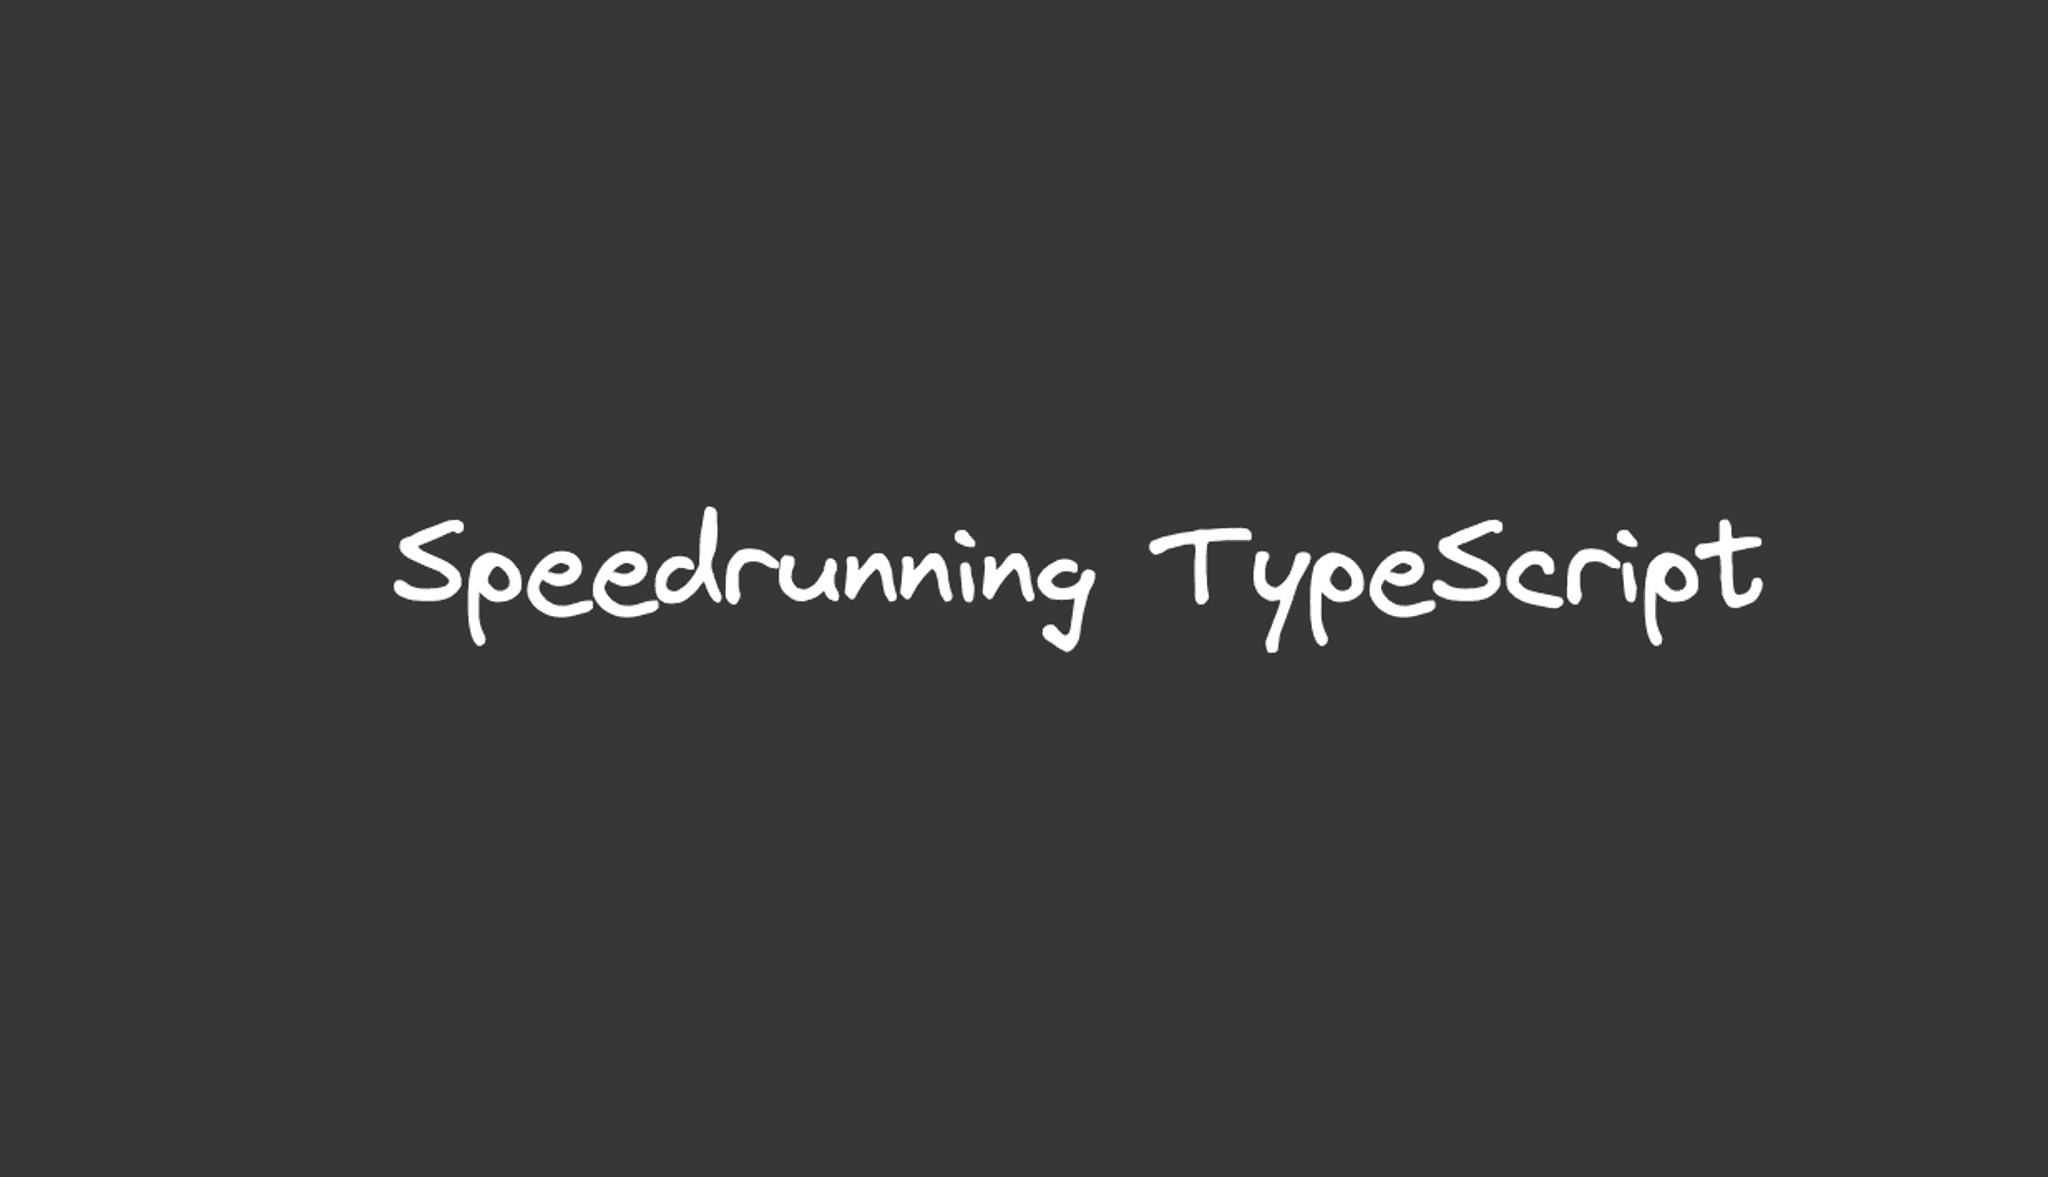 An image containing the text, "Speedrunning TypeScript".